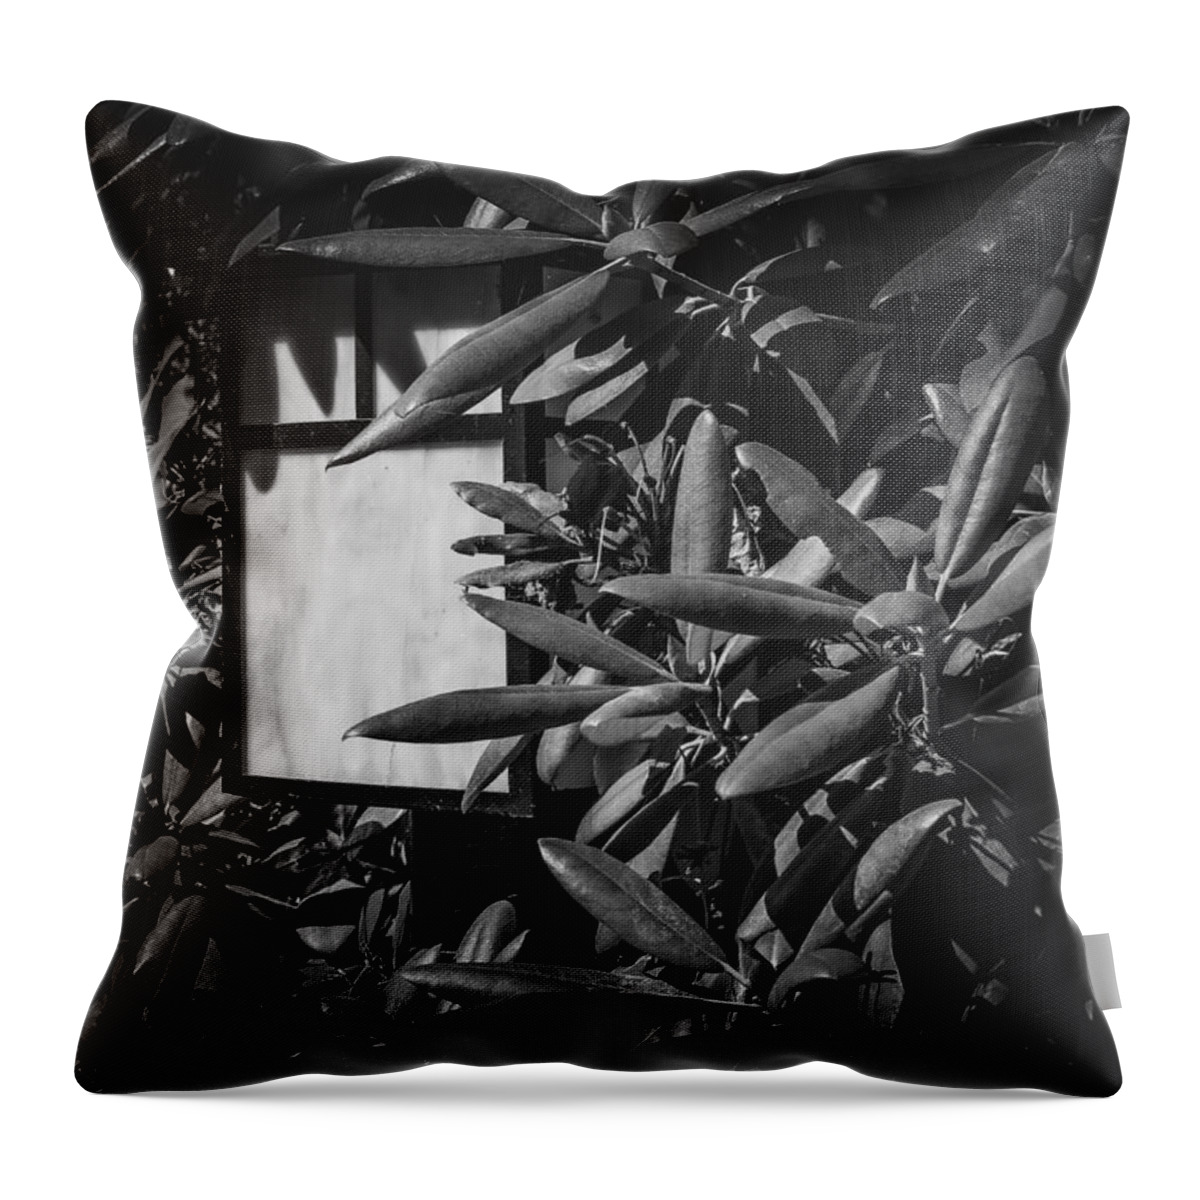 Lamp Throw Pillow featuring the photograph Lamp in Mukilteo by Anamar Pictures